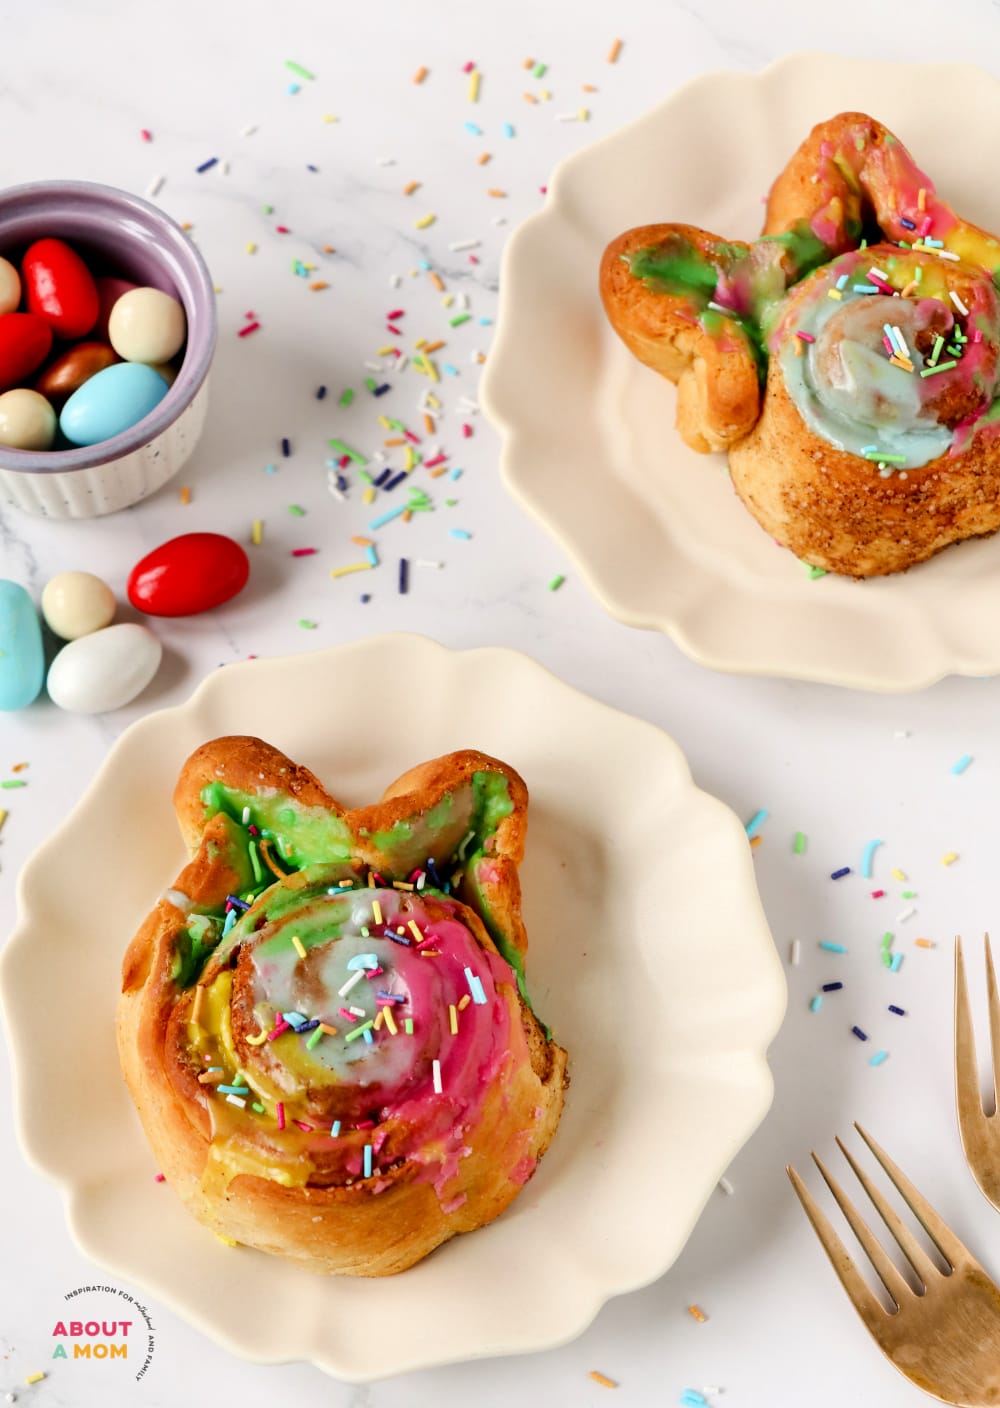 Easter is just around the corner, and if you're looking for a festive breakfast or dessert, these Homemade Easter Bunny Cinnamon Rolls are perfect!